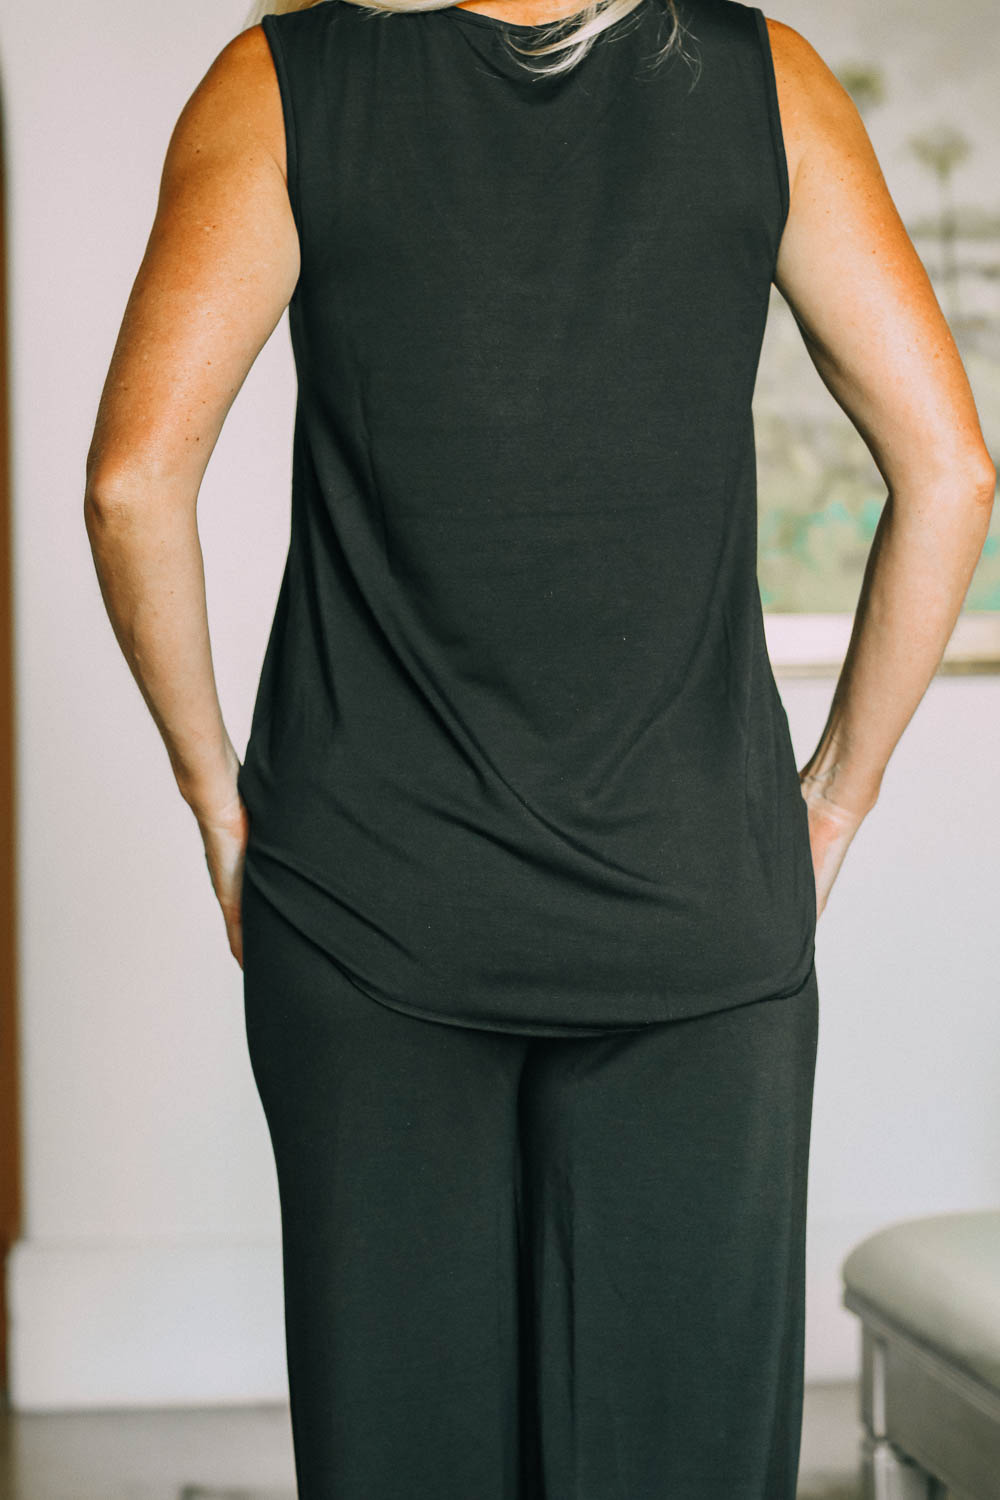 best pajamas, black luxe jersey sleeveless top and cropped pants pajamas set by Barefoot Dreams on blonde woman